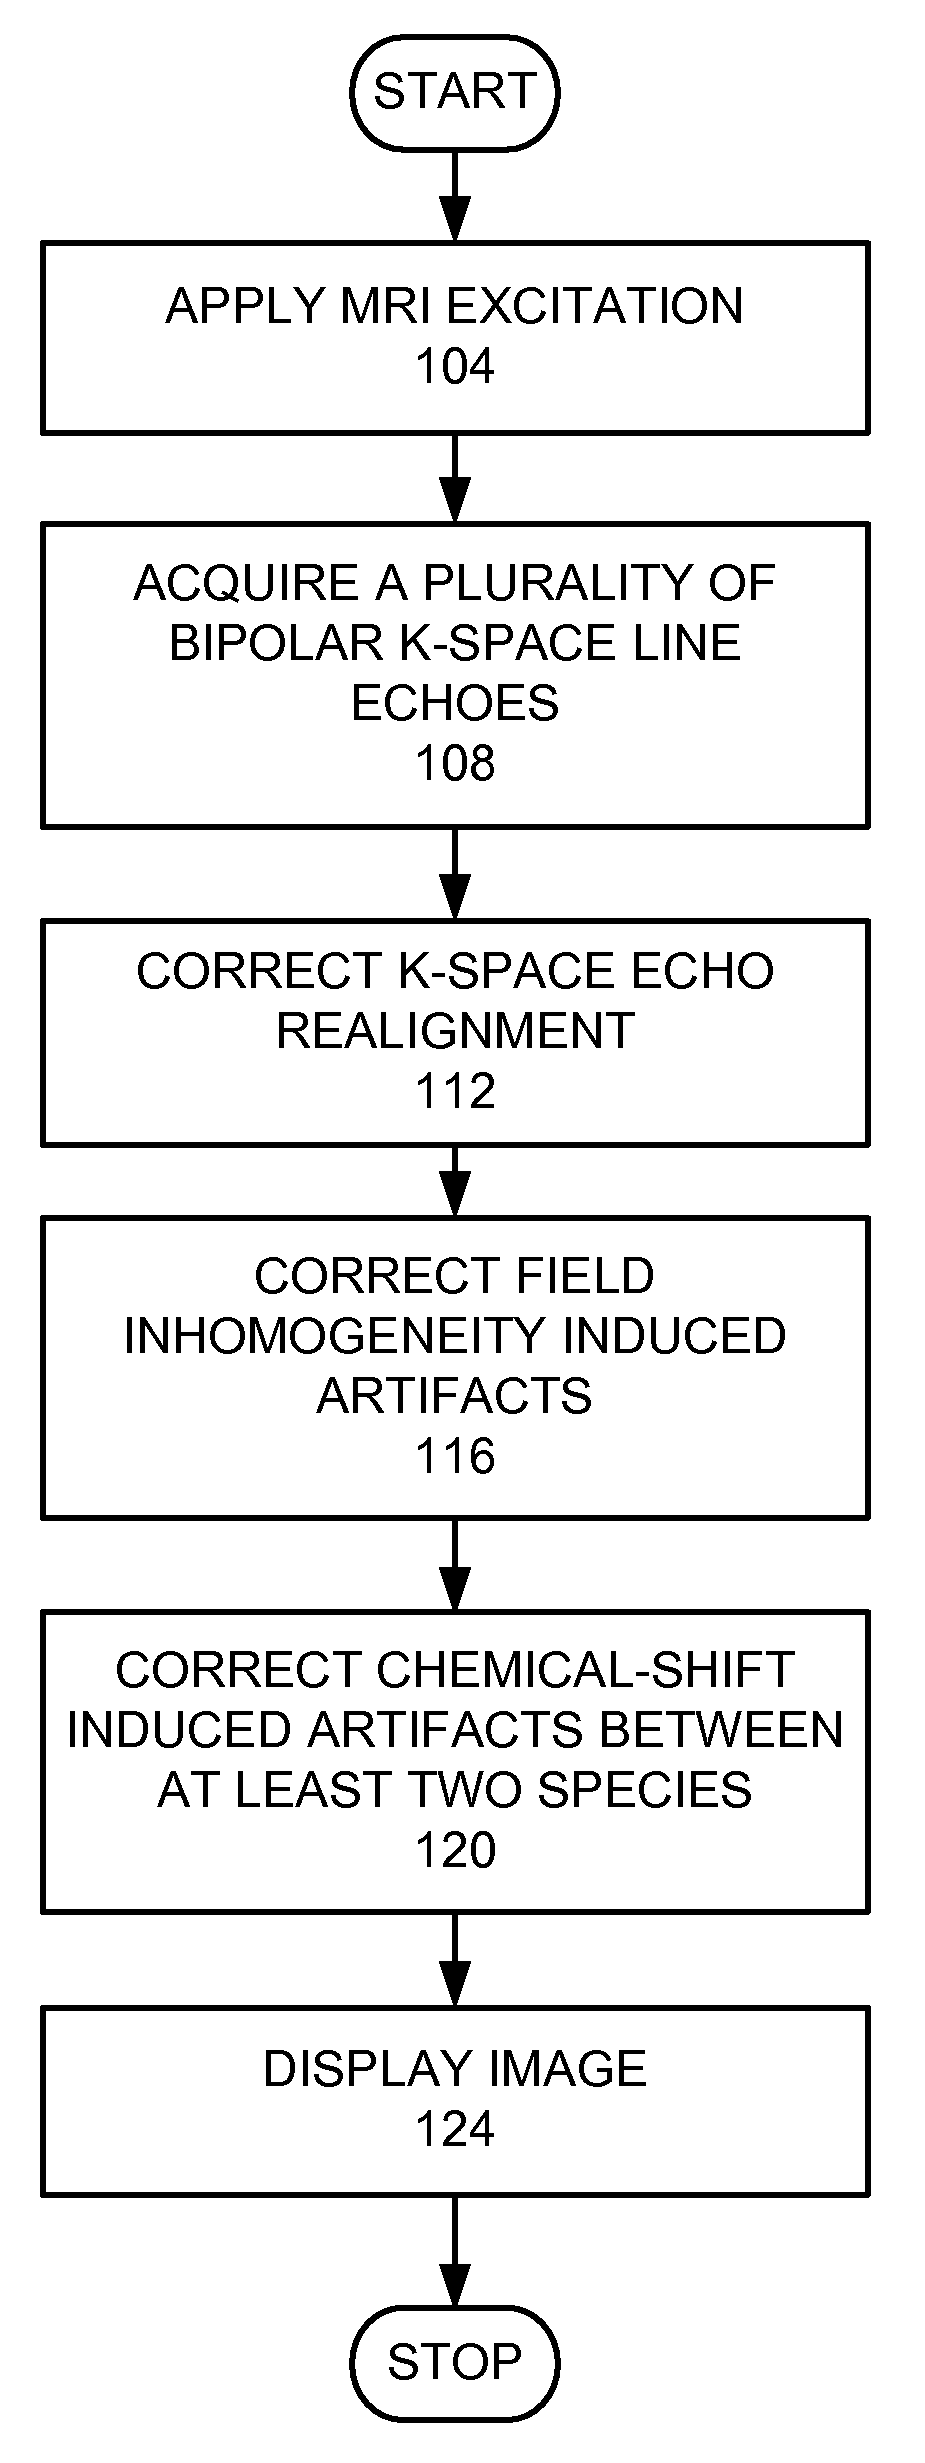 Magnetic resonance imaging with bipolar multi-echo sequences